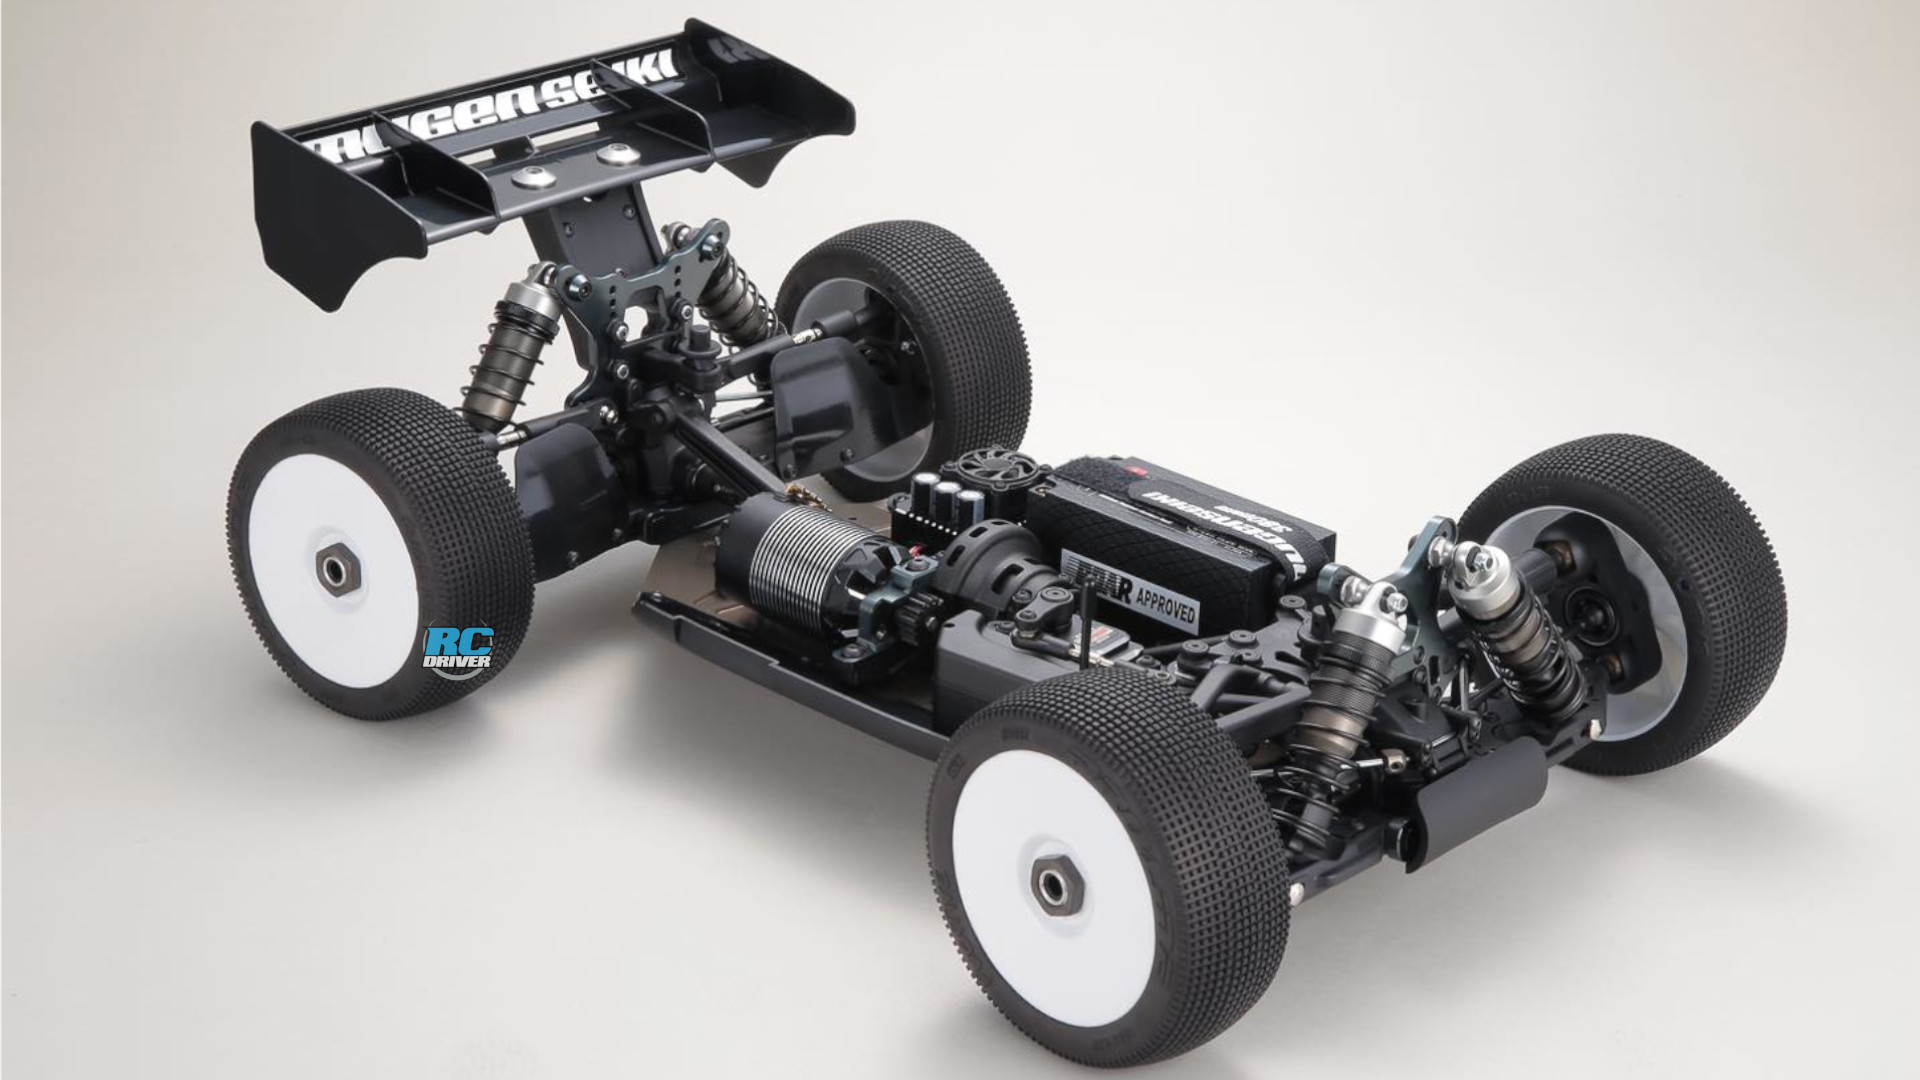 Mugen Seiki MBX8R Eco 1/8-scale Electric 4WD Racing Buggy